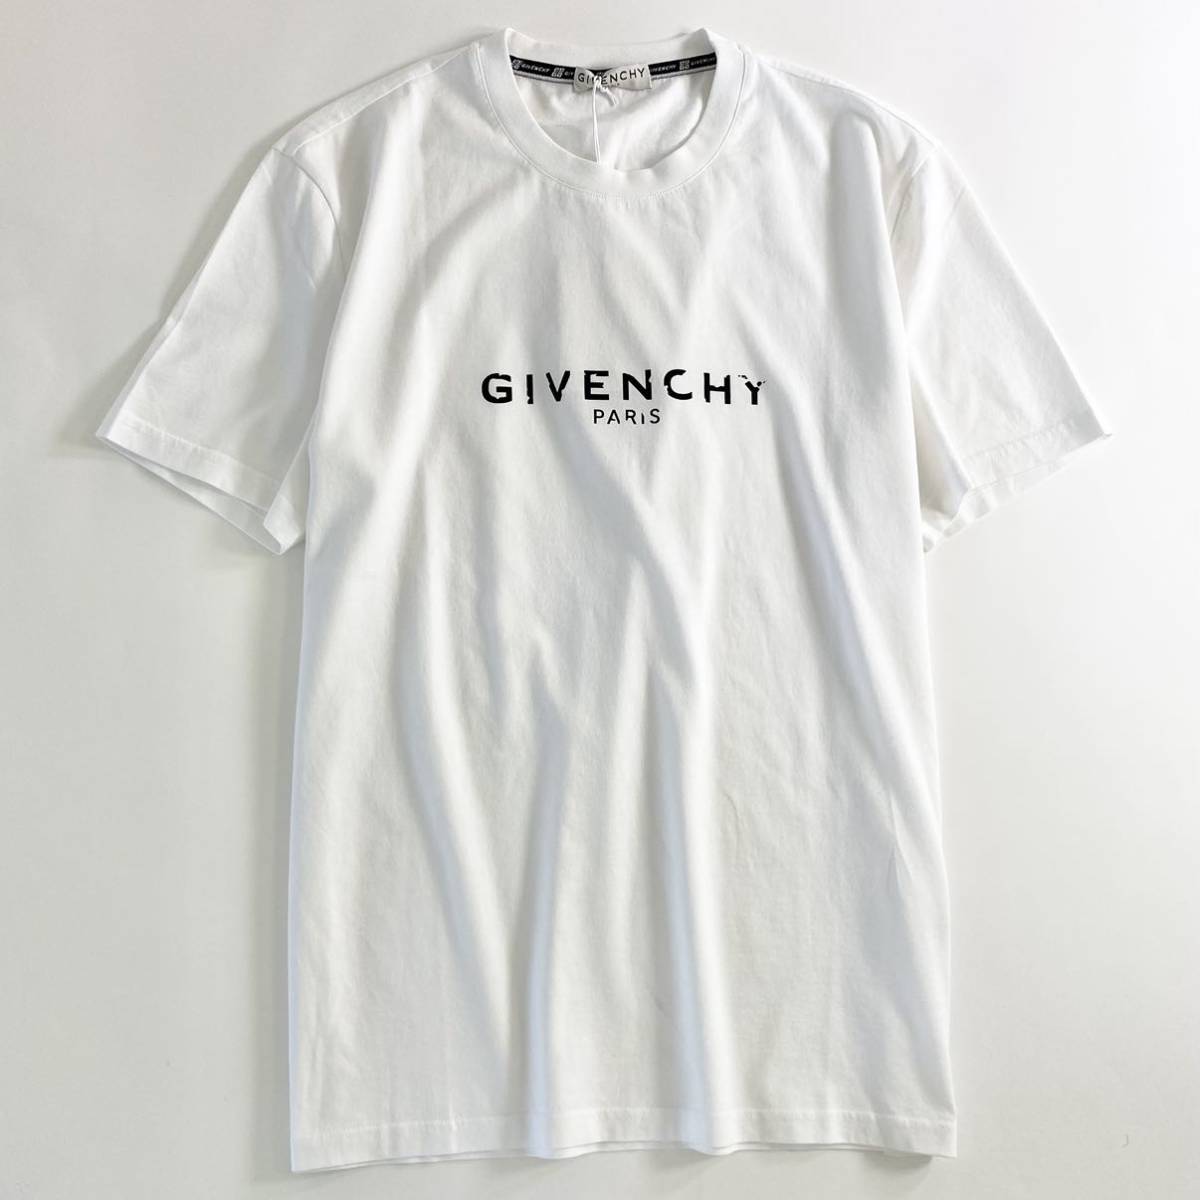 07e20 unused tag attaching * GIVENCHY Givenchy VINTAGE SLIM FIT T-SHIRT size L white men's T-shirt short sleeves Logo print crew neck 